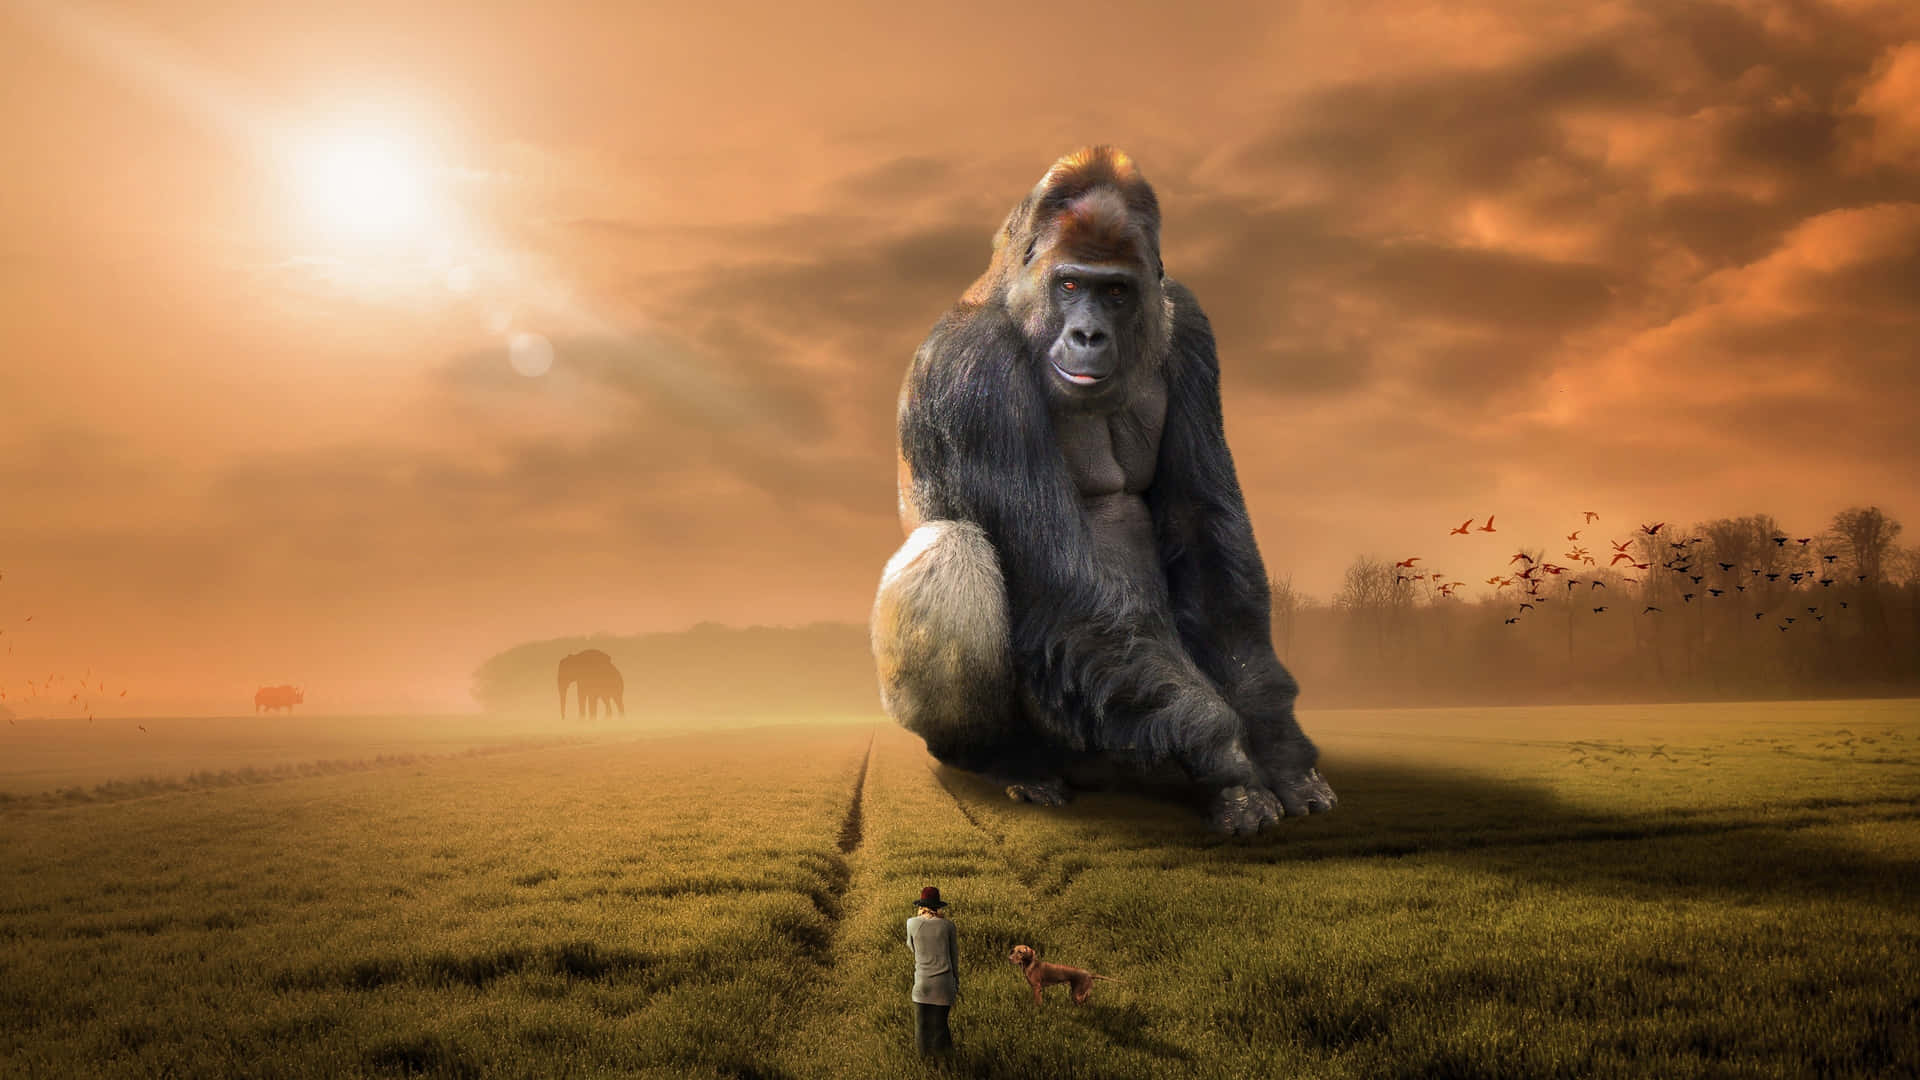 "See the mighty King Kong on the big screen in 4K ultra-high definition." Wallpaper